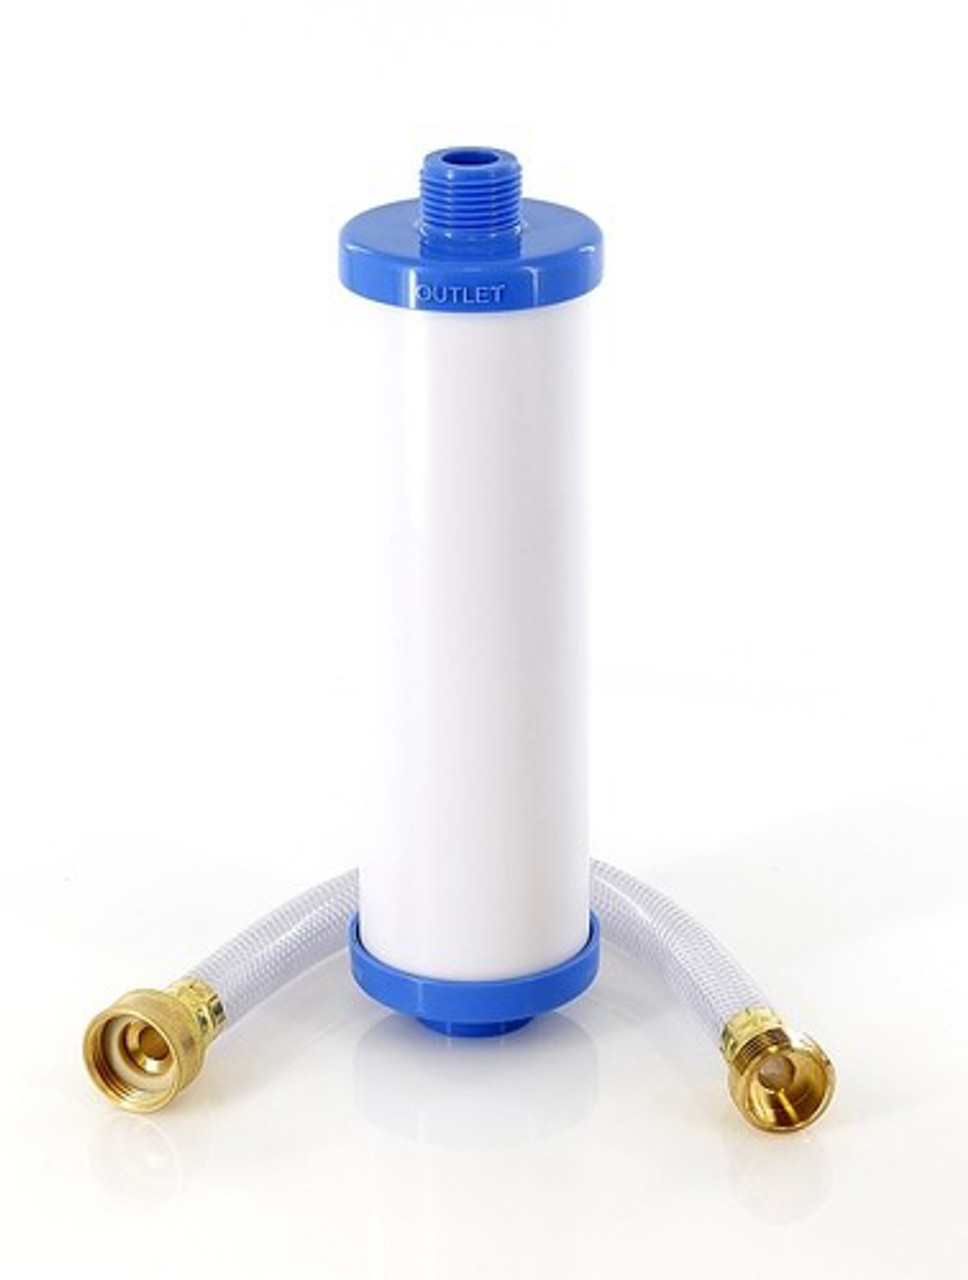 Culligan - Culligan® RV-800 Pre-Tank In-Line Water Filter for RVs, Campers, and Boats